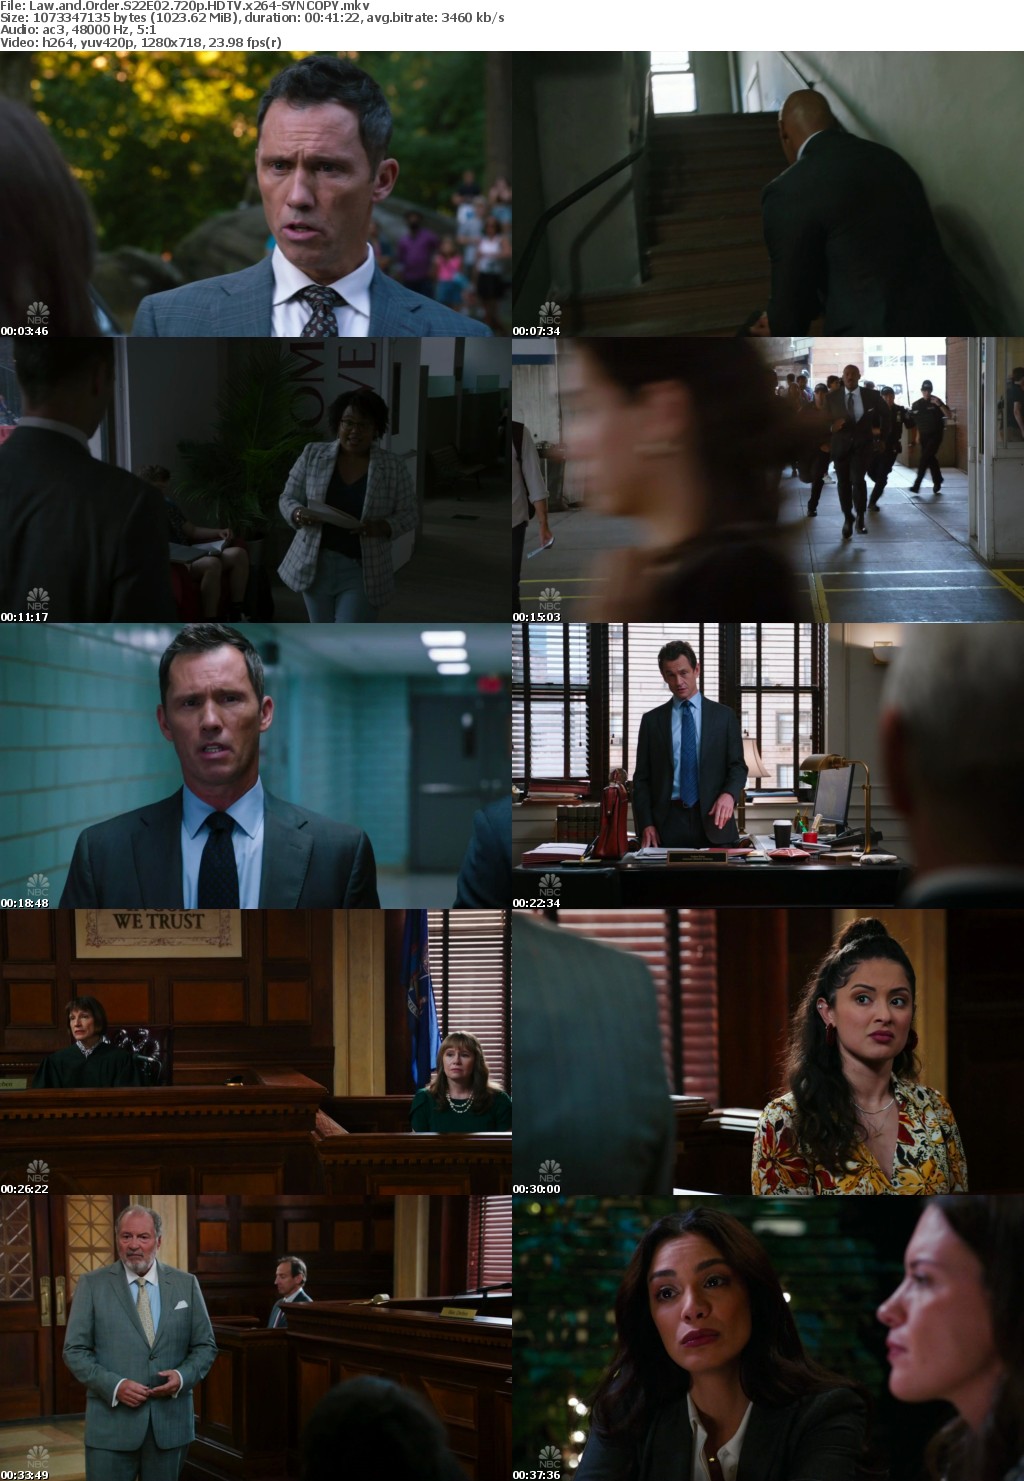 Law and Order S22E02 720p HDTV x264-SYNCOPY